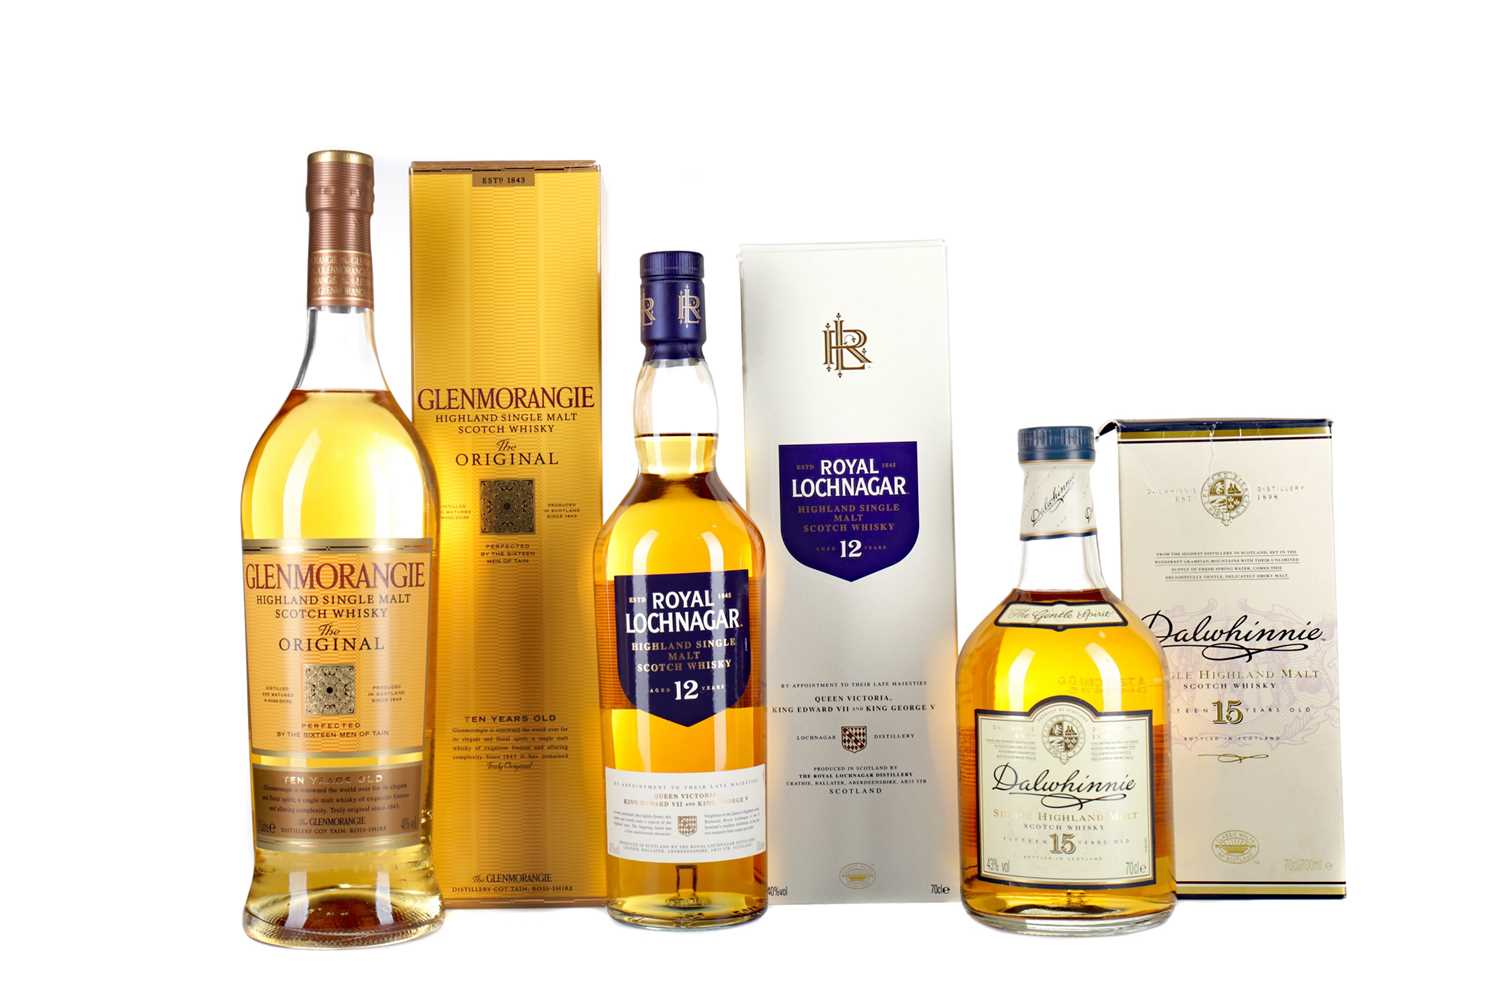 Lot 18 - GLENMORANGIE 10 YEARS OLD, ROYAL LOCHNAGAR 12 YEARS OLD AND DALWHINNIE AGED 15 YEARS